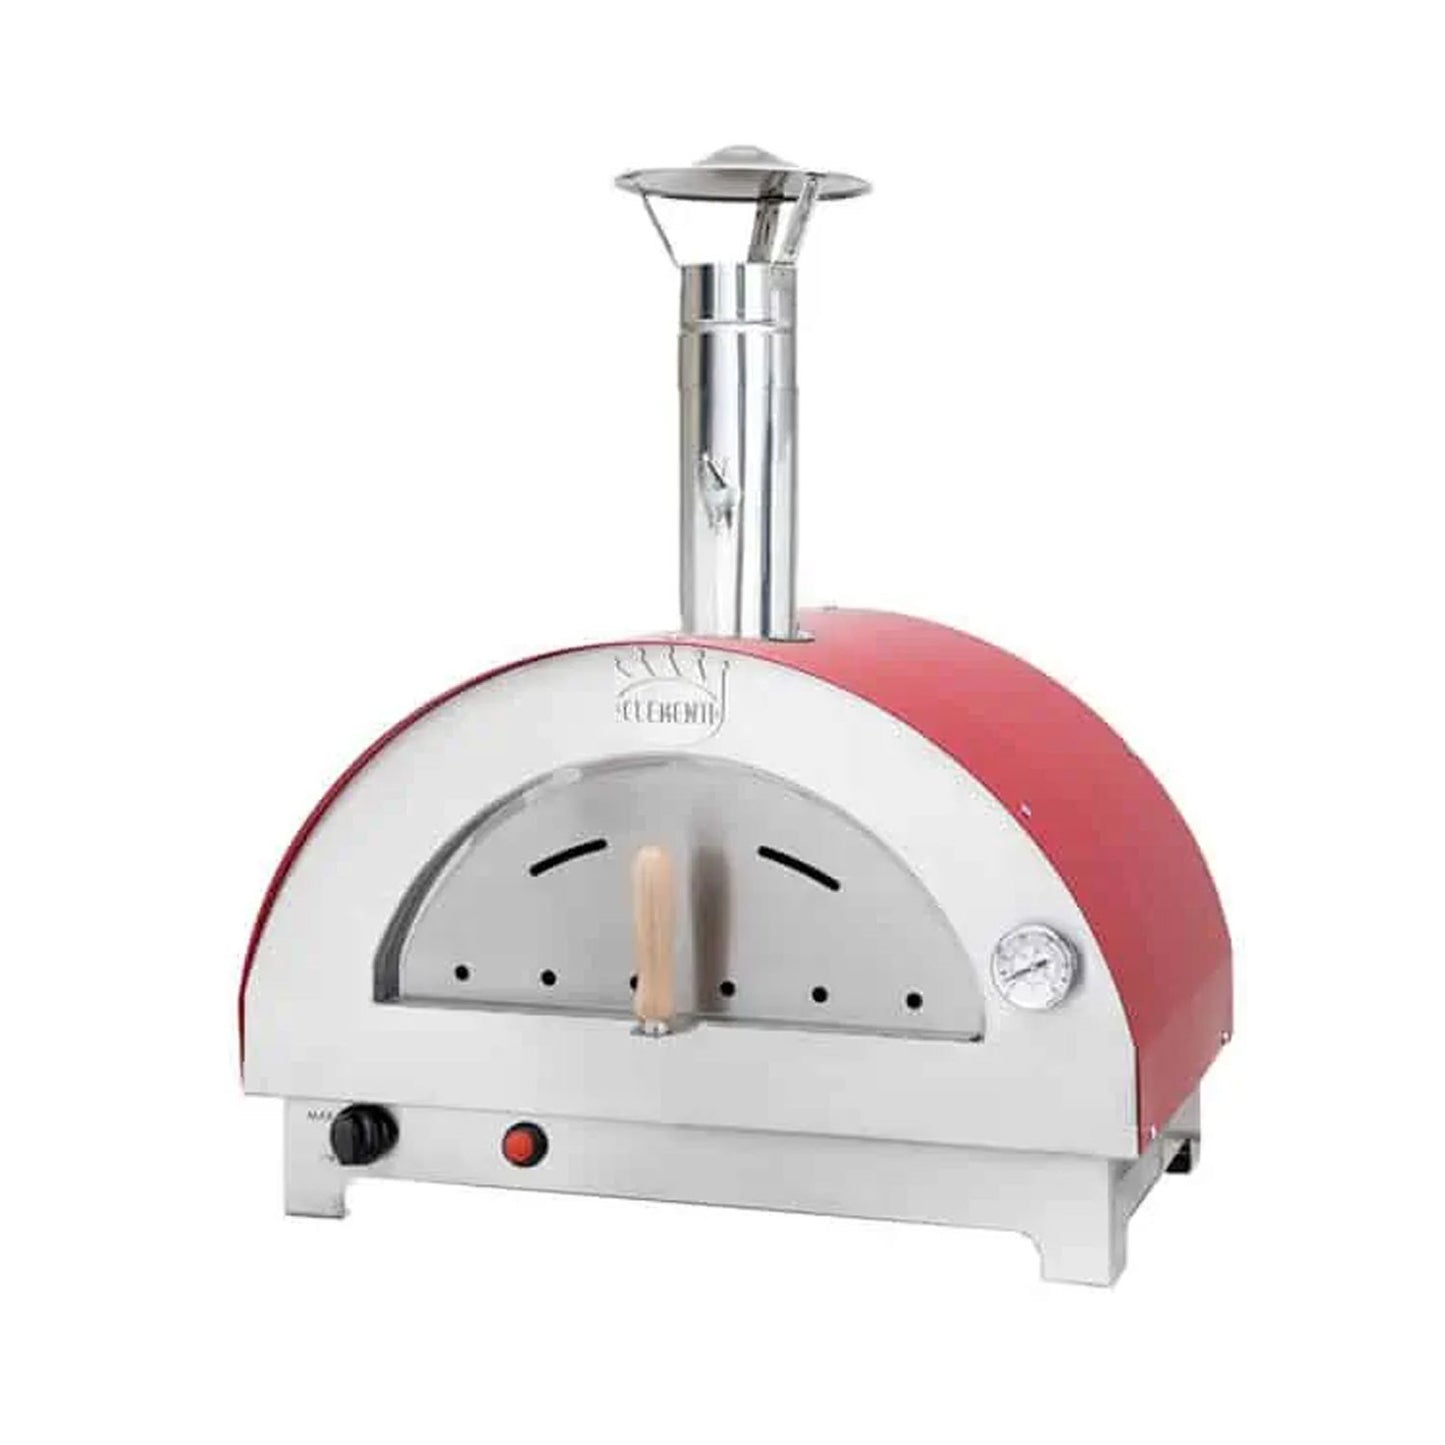 CLEMENTI | Clementino Hybrid Portable Wood & Gas Fired Pizza Oven in red